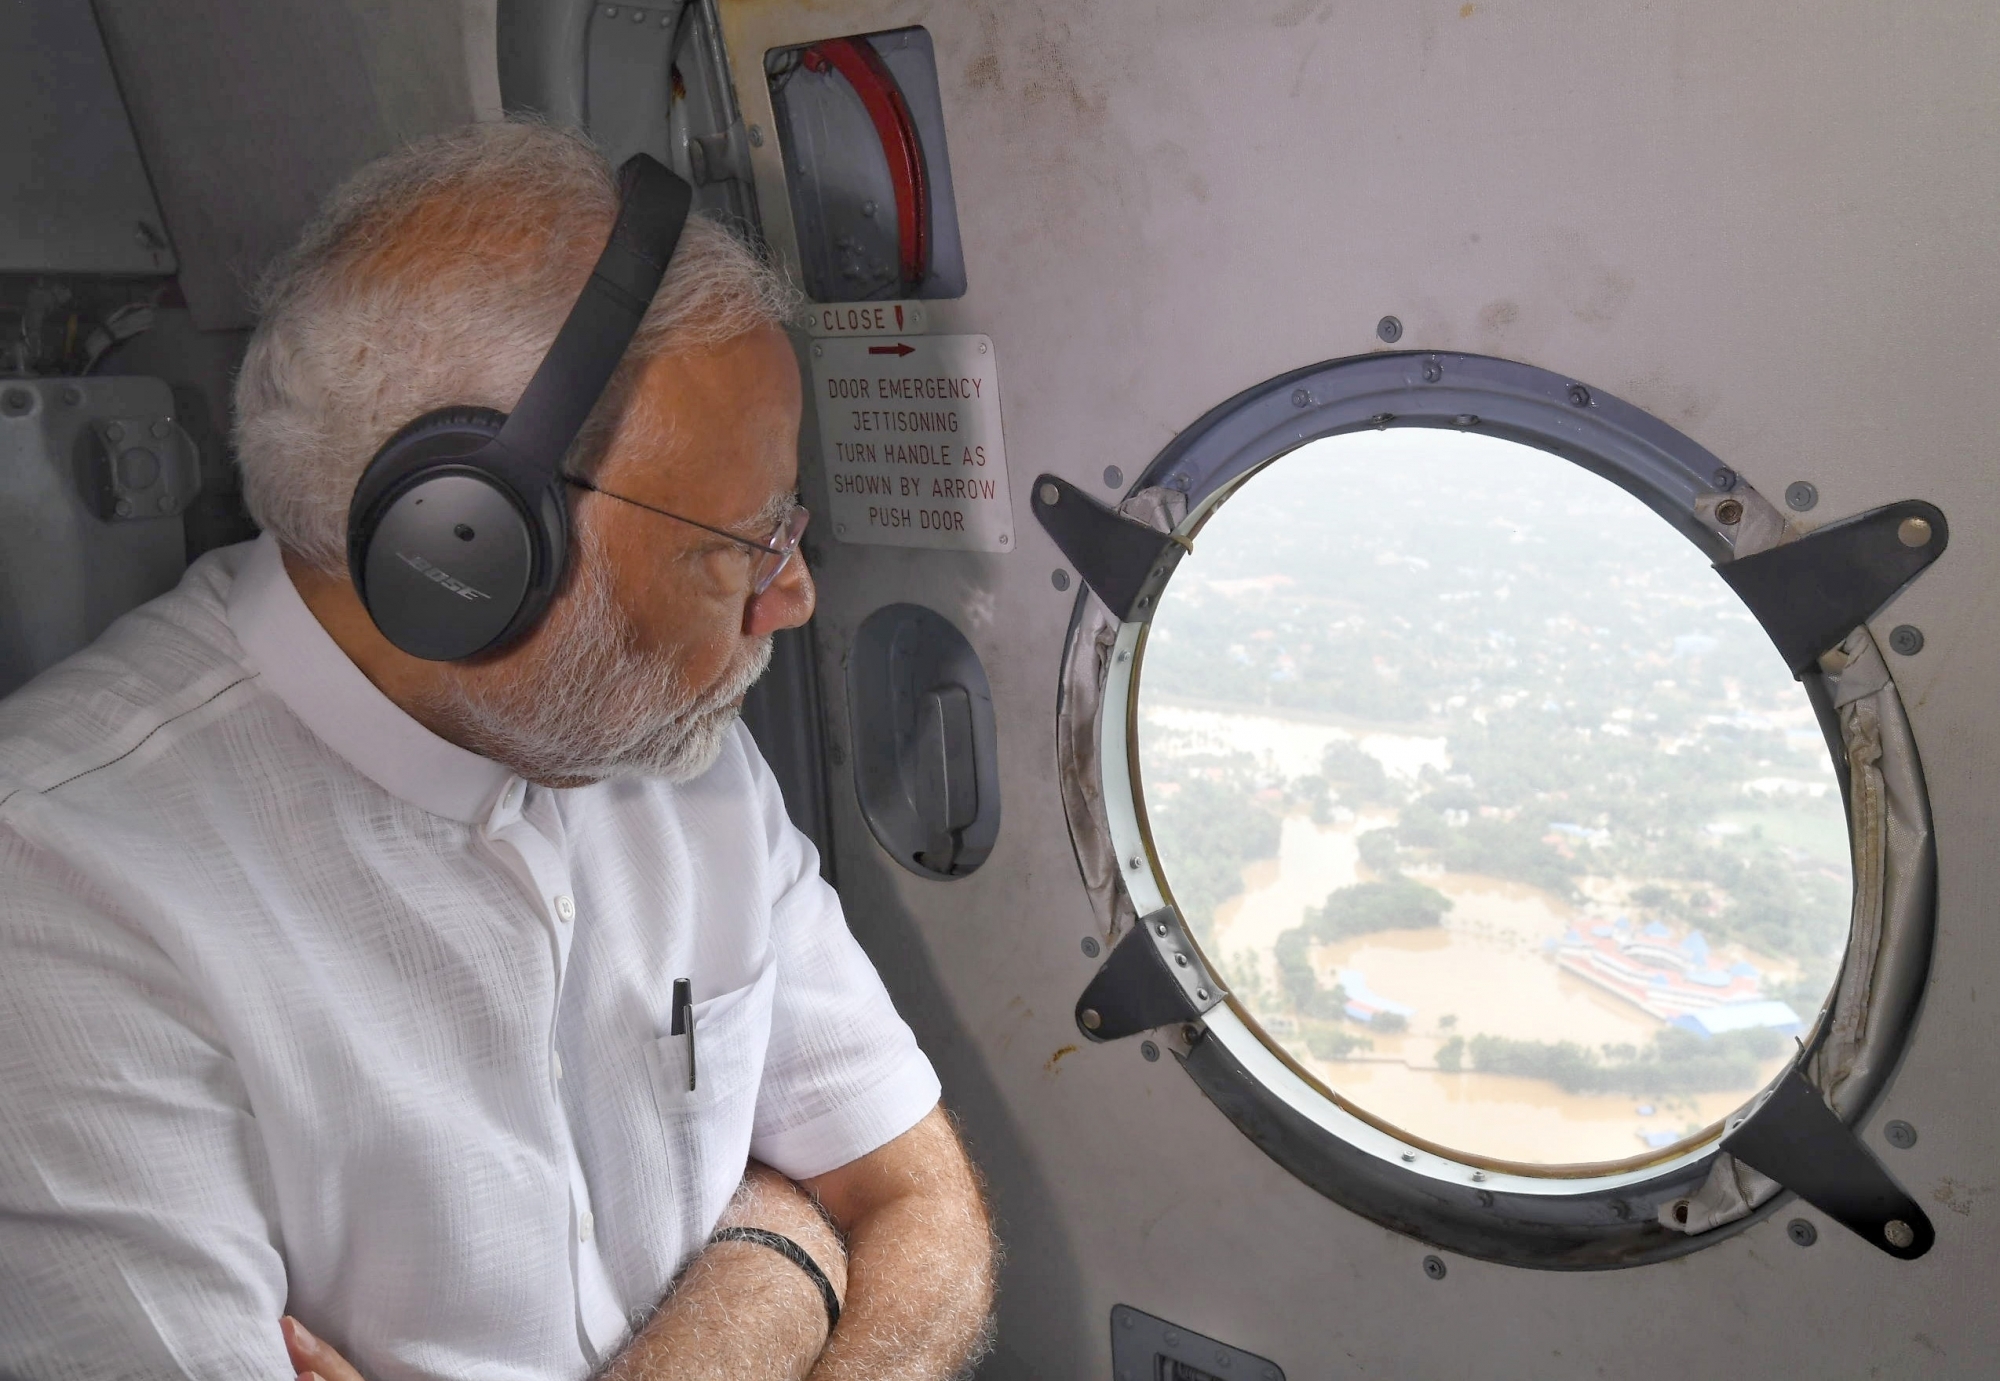 PM Narendra Modi conducted an aerial survey of cyclone Amphan-affected Odisha